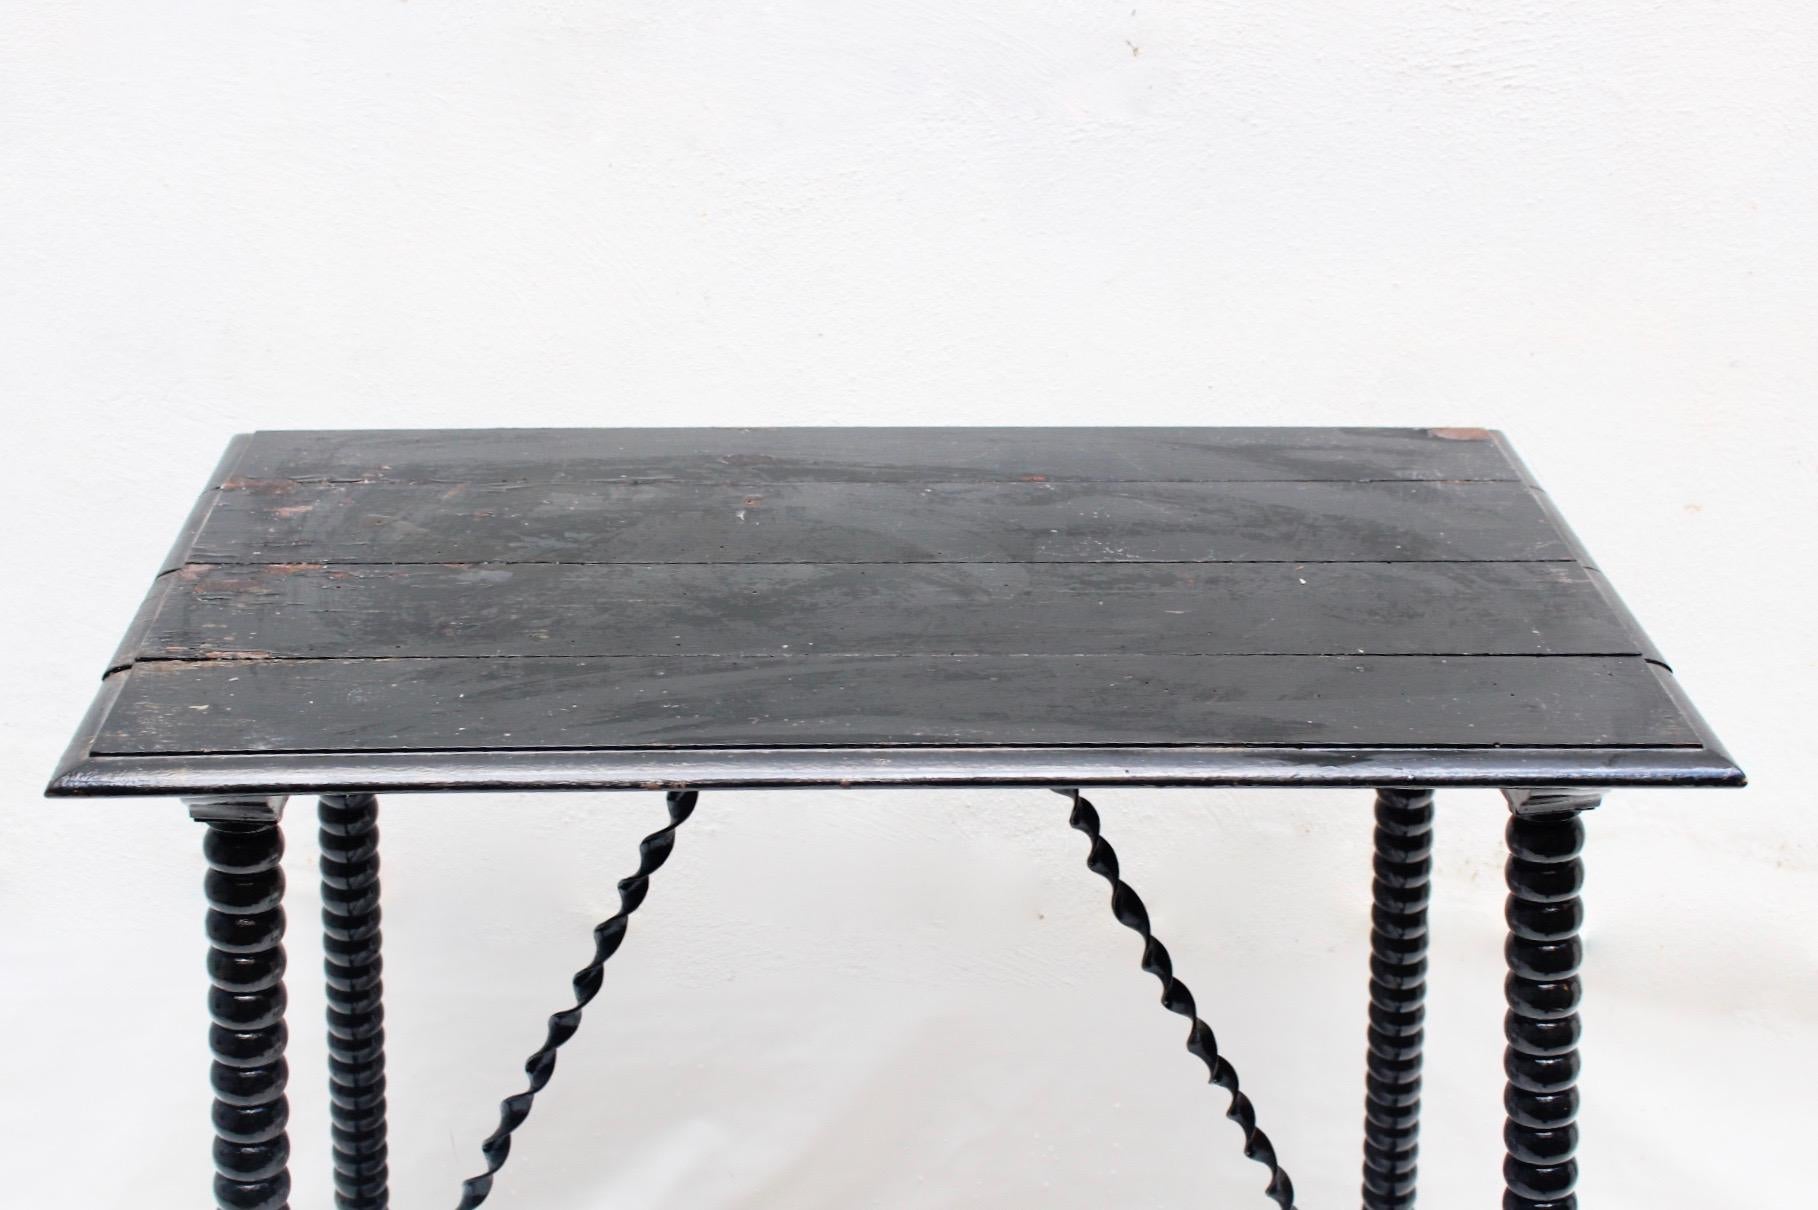 Hand-Carved Baroque Spanish Table with Turned Legs and Iron Stretches, 19th Century For Sale